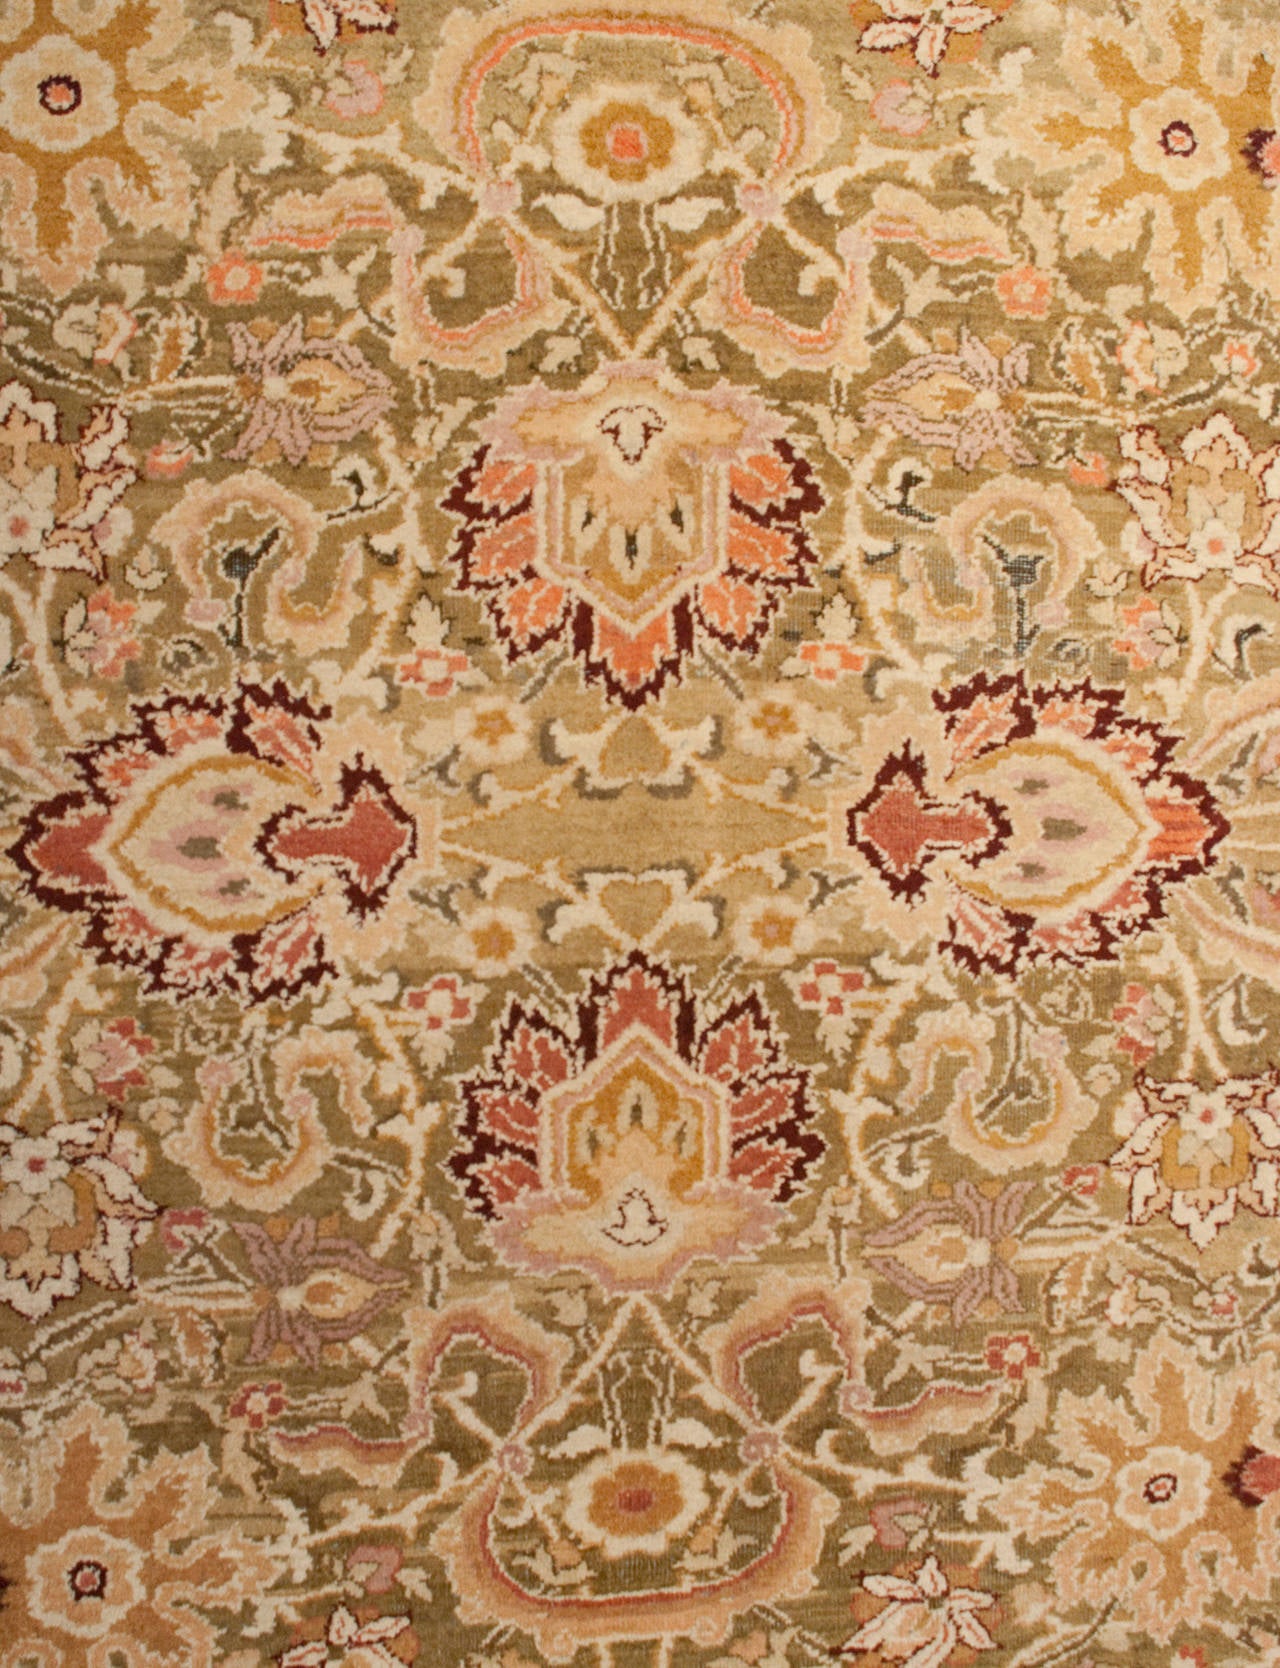 An early 20th century Indian Agra rug with an intricately woven multicolored floral pattern on a chartreuse green background, surrounded by multiple complementary multicolored floral borders.